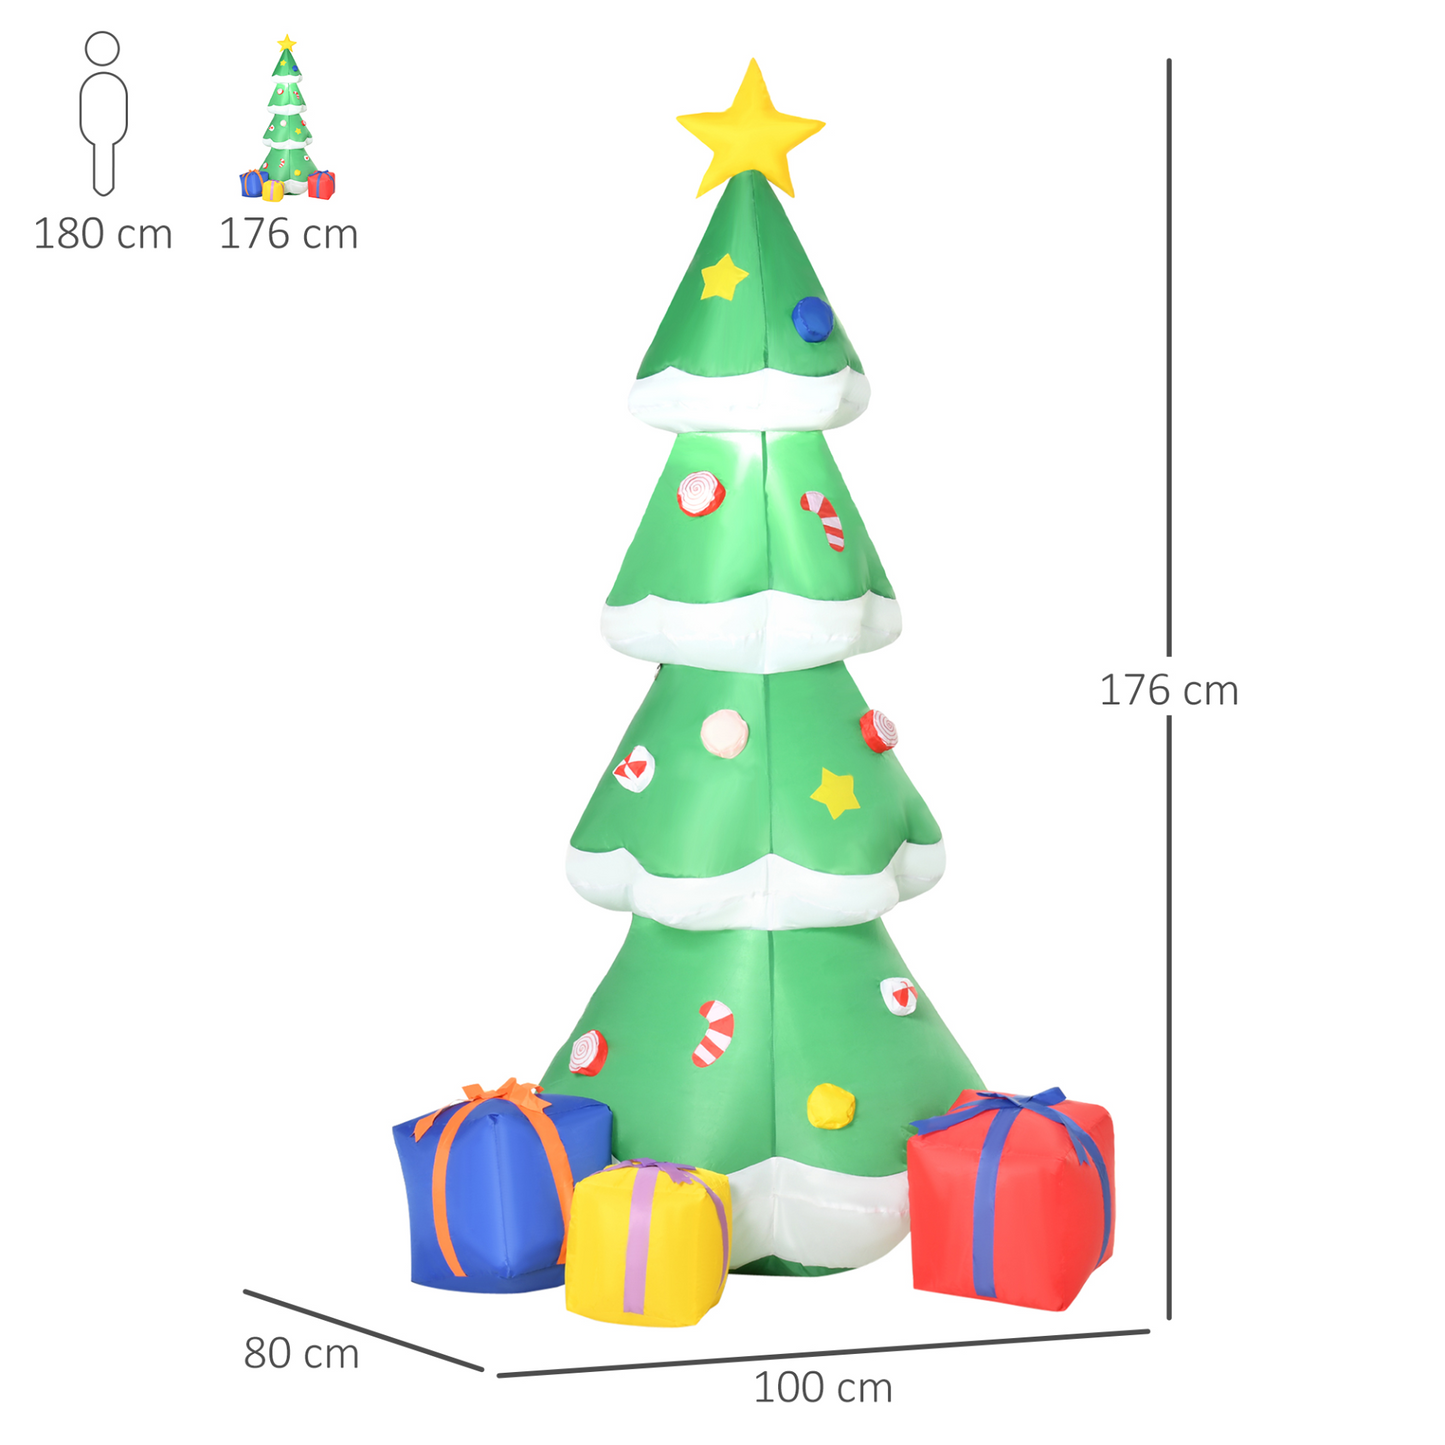 HOMCOM 6ft Tall Inflatable Christmas Tree with Star and Multicolour Gift Boxes Huge Lighted Outdoor Decoration with 3 Built-in LED Lights Xmas Inflatables Toy in Yard Lawn Garden